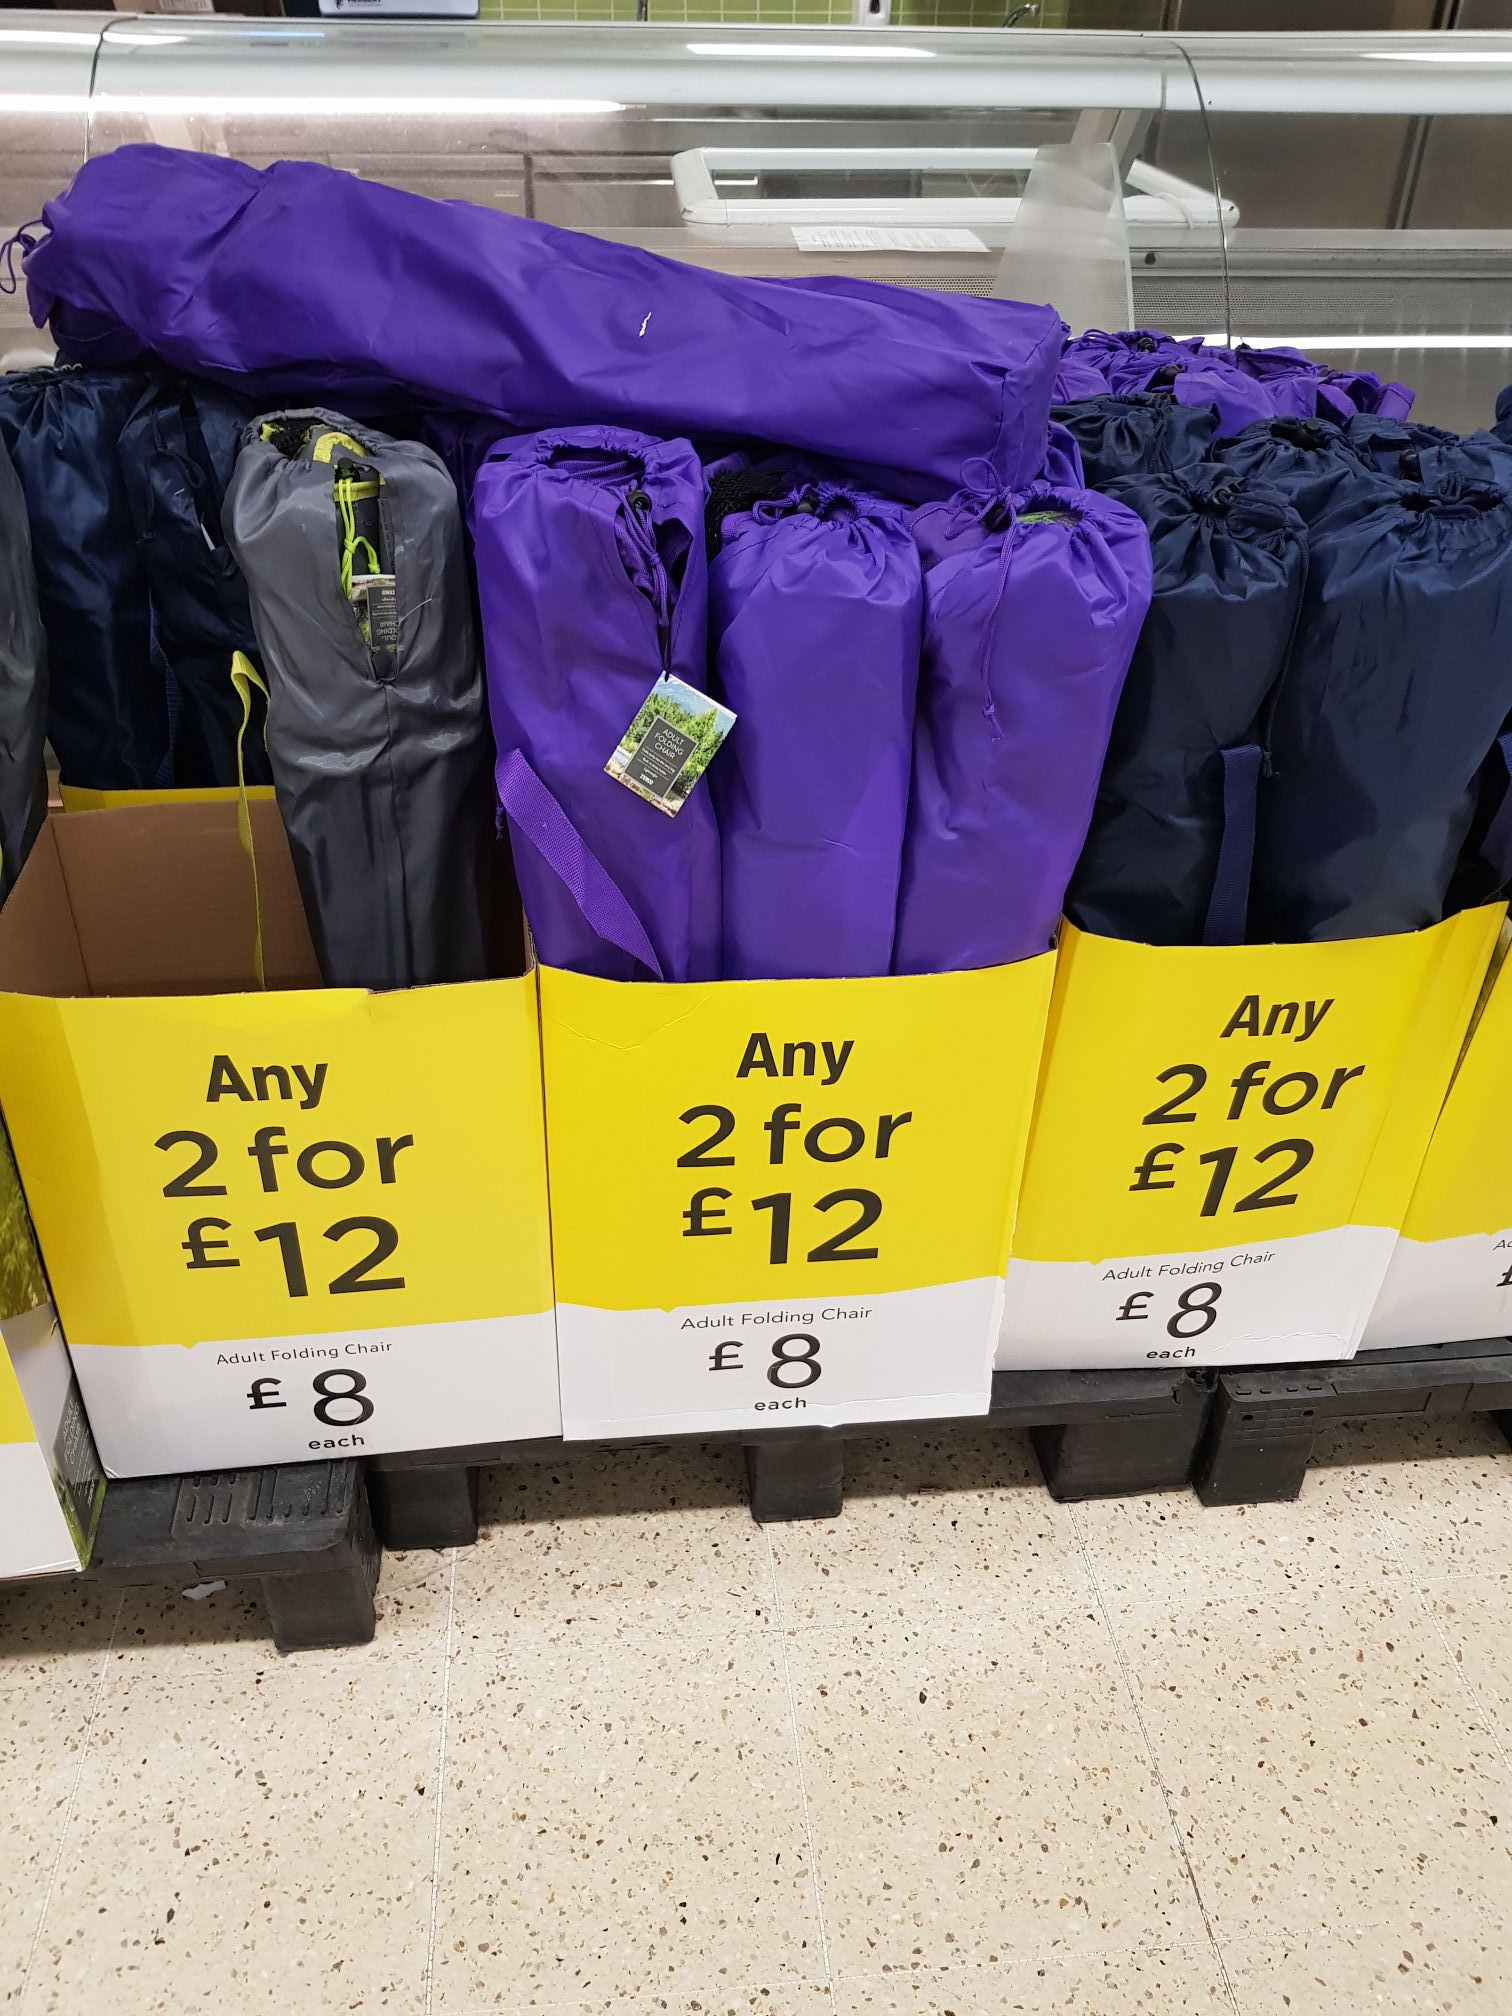 Camping chairs - £8 each or 2 for £12 instore @ Tesco, Cornwall